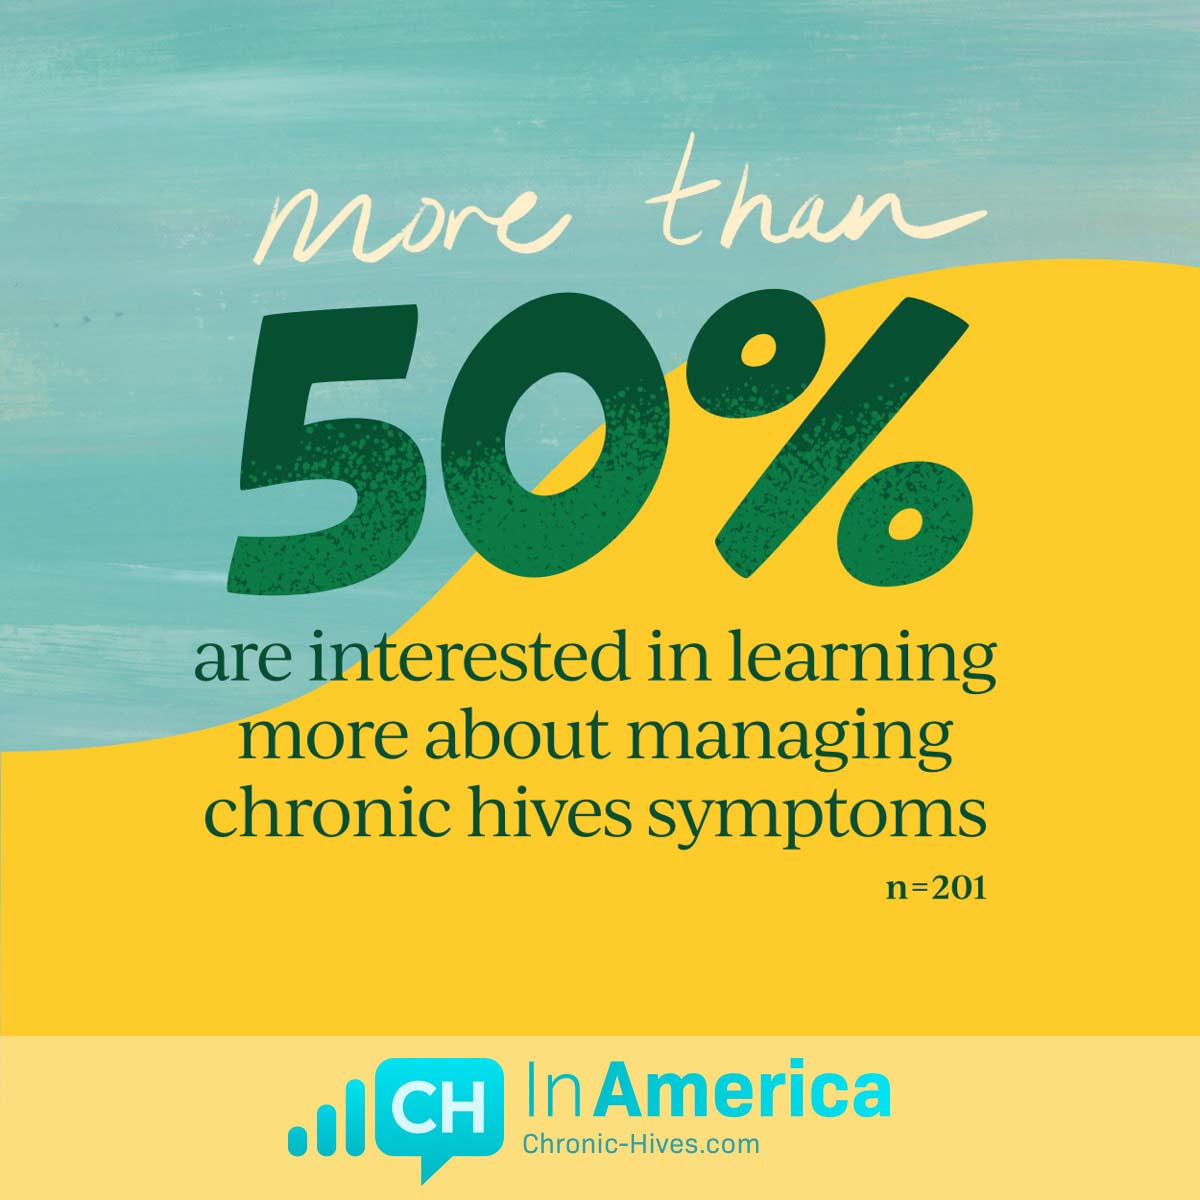 More than 50% are interested in learning more about chronic hives symptoms.